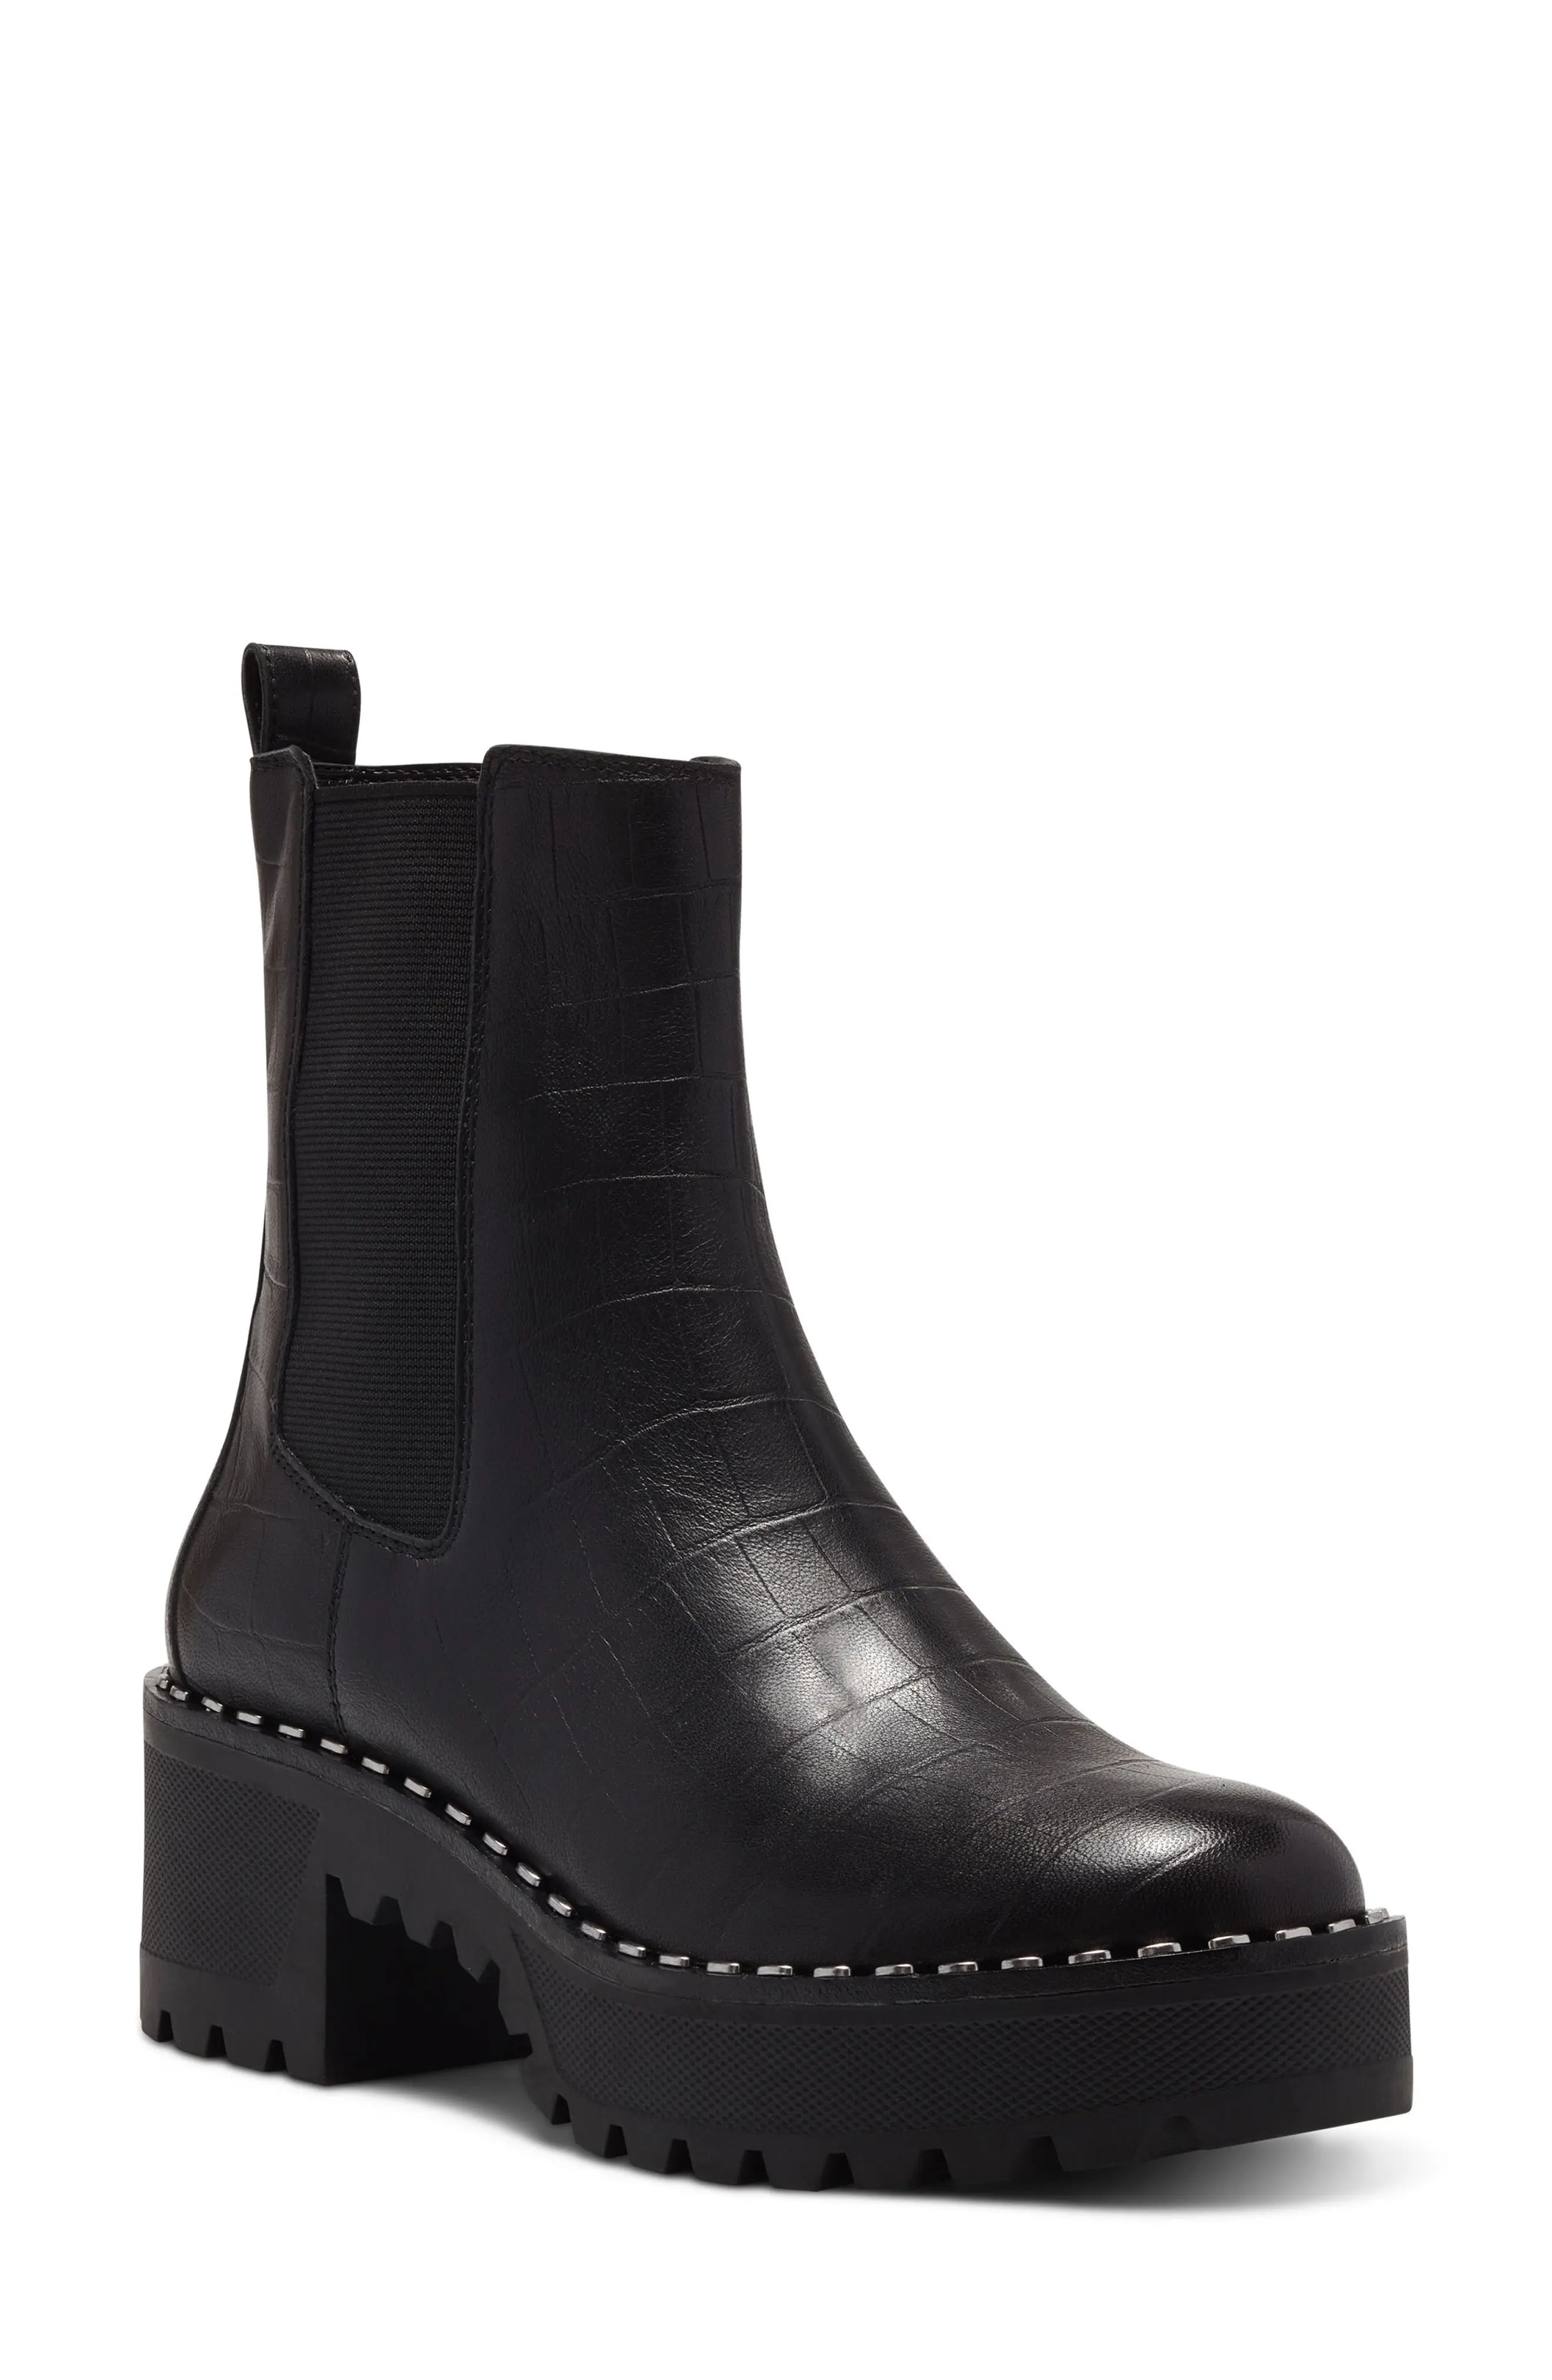 Vince Camuto Madisha Chelsea Boot, Size 8.5 in Black at Nordstrom | Nordstrom